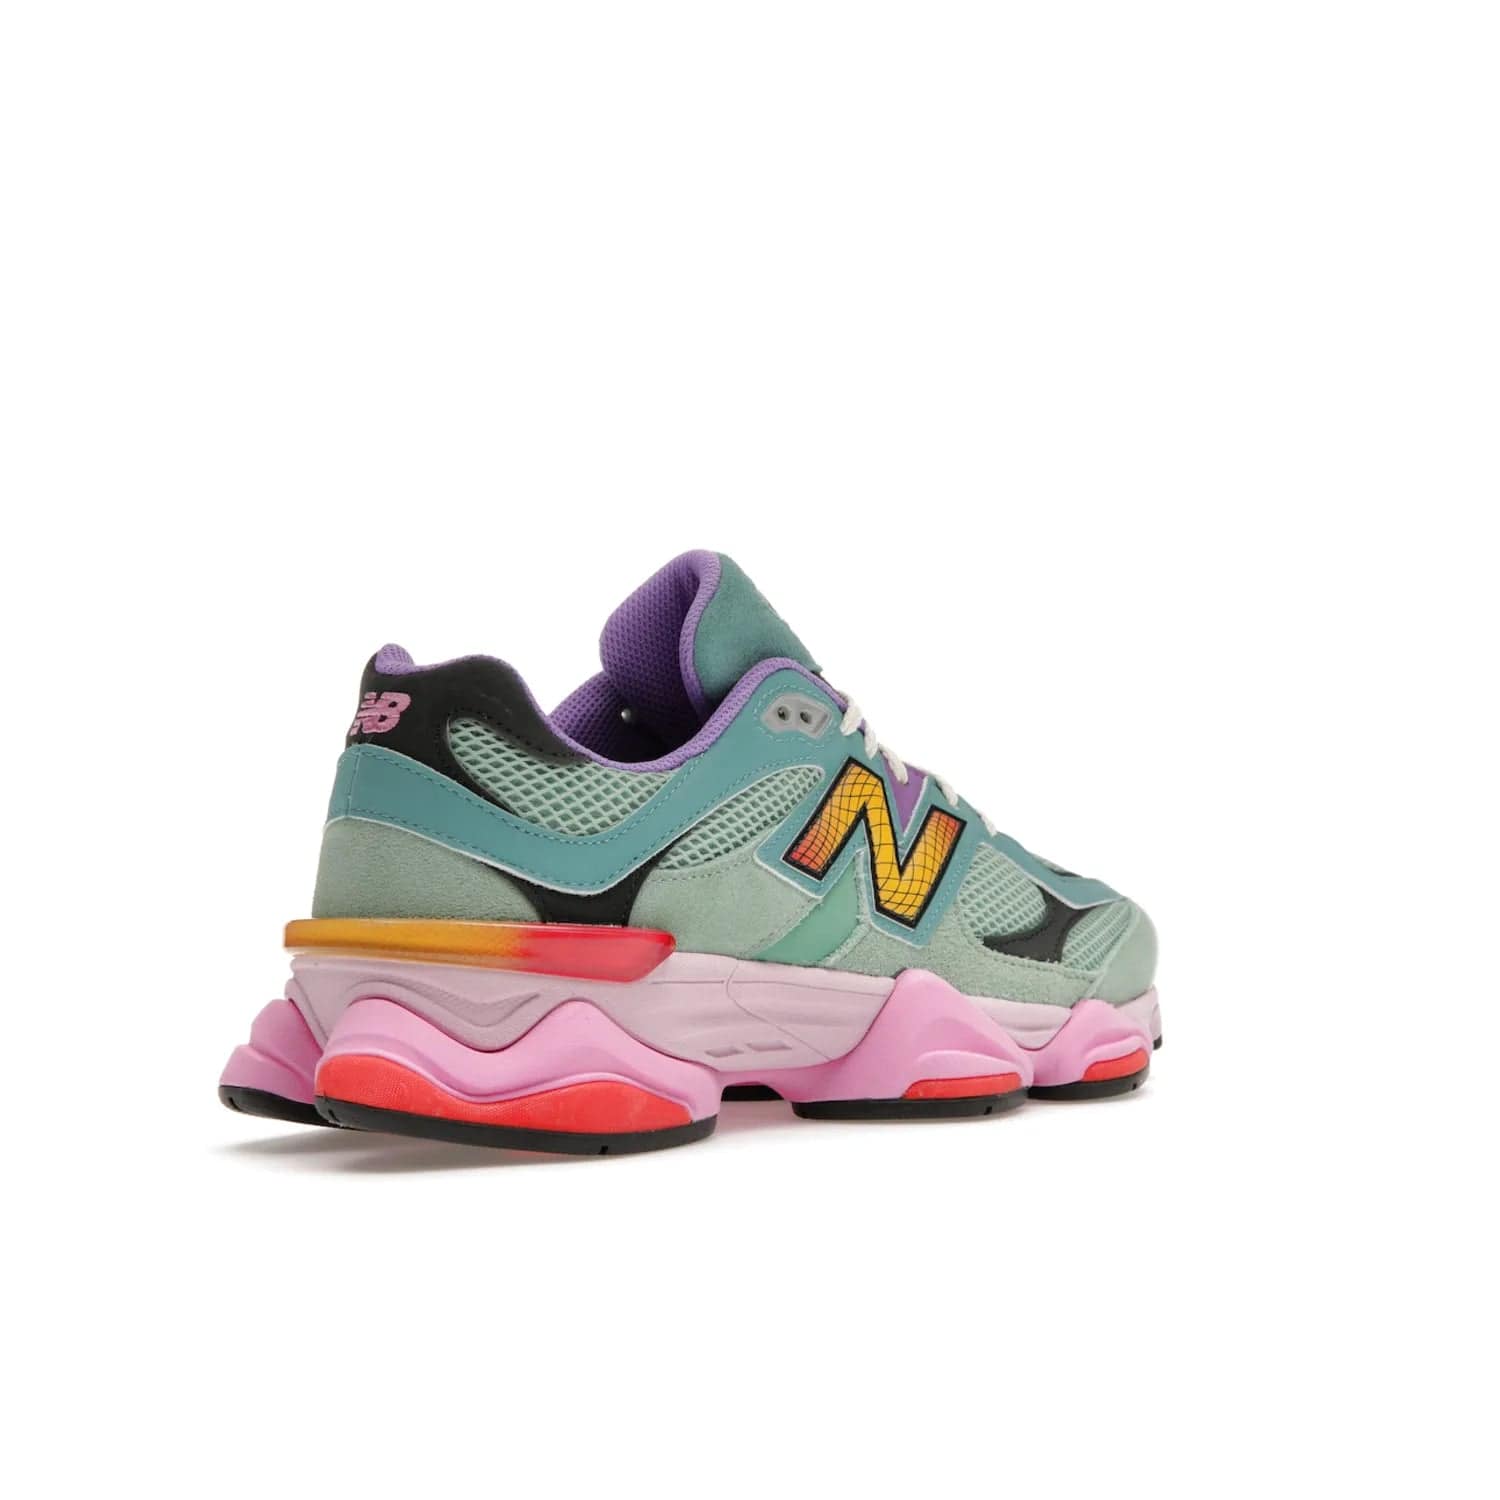 New Balance 9060 Warped Multi-Color - Image 33 - Only at www.BallersClubKickz.com - Enhance your style with the new New Balance 9060 Warped Multi-Colour! Suede overlays, mesh base layer and ABZORB midsole provide comfortable cushioning, while the colourful design ticks all the latest trends. Nylon laces offer an adjustable fit for maximum convenience. Debuting on March 31, 2023 - a must-have addition to your sneaker collection.